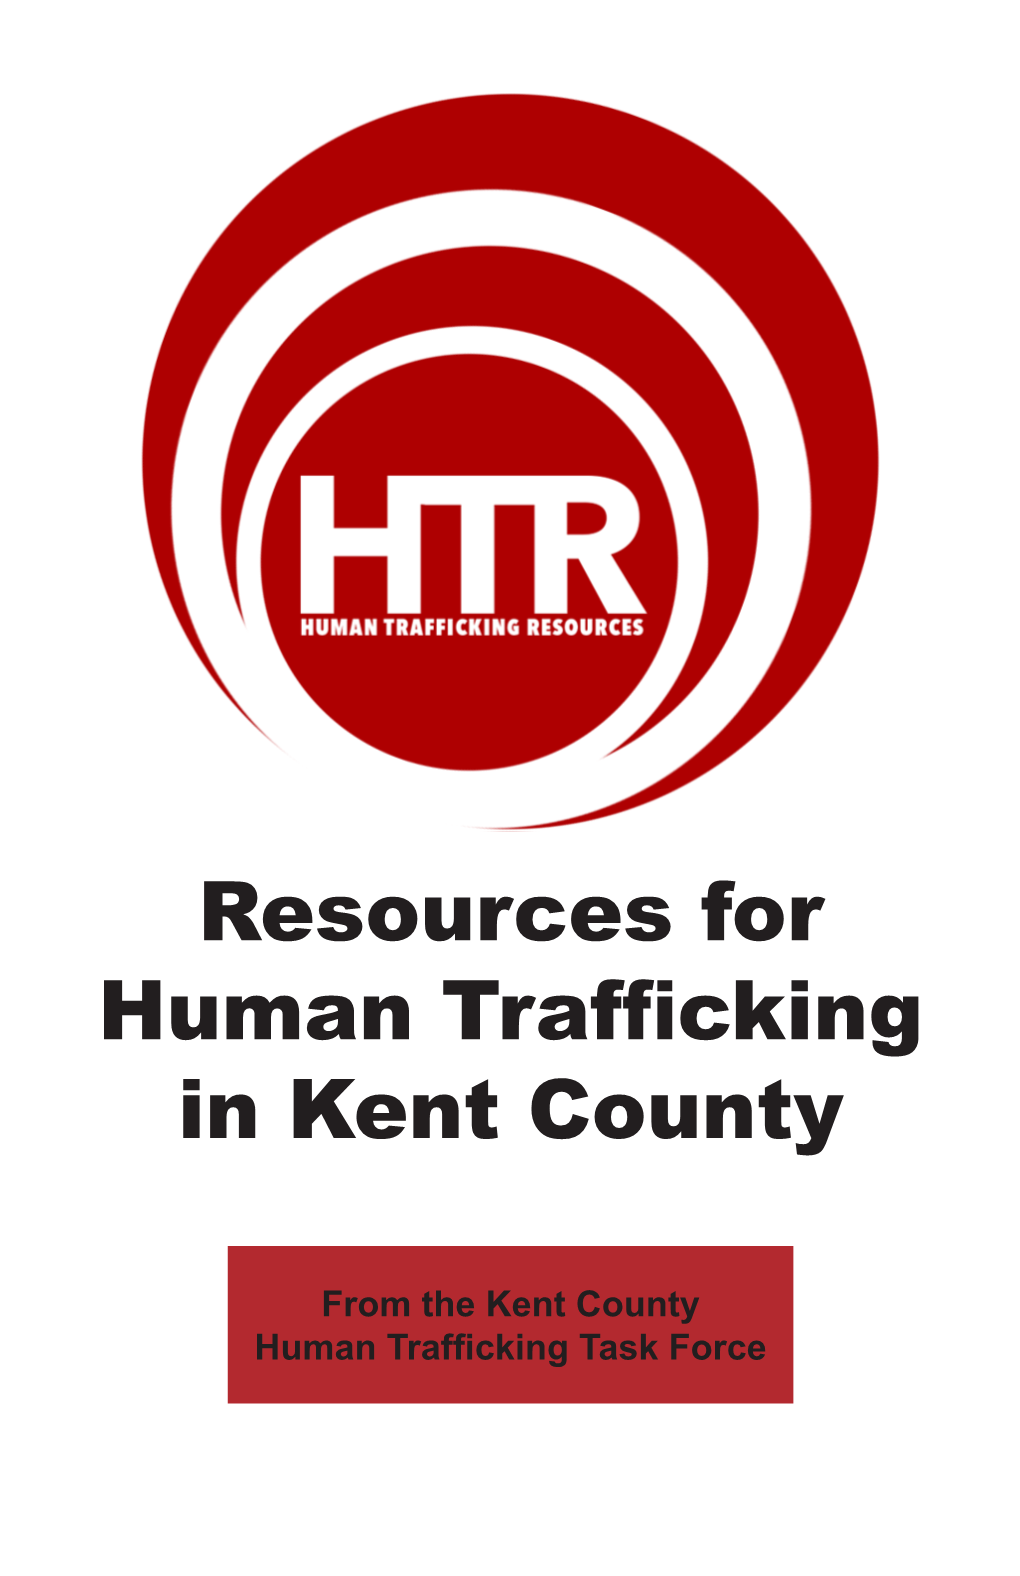 Resources for Human Trafficking in Kent County